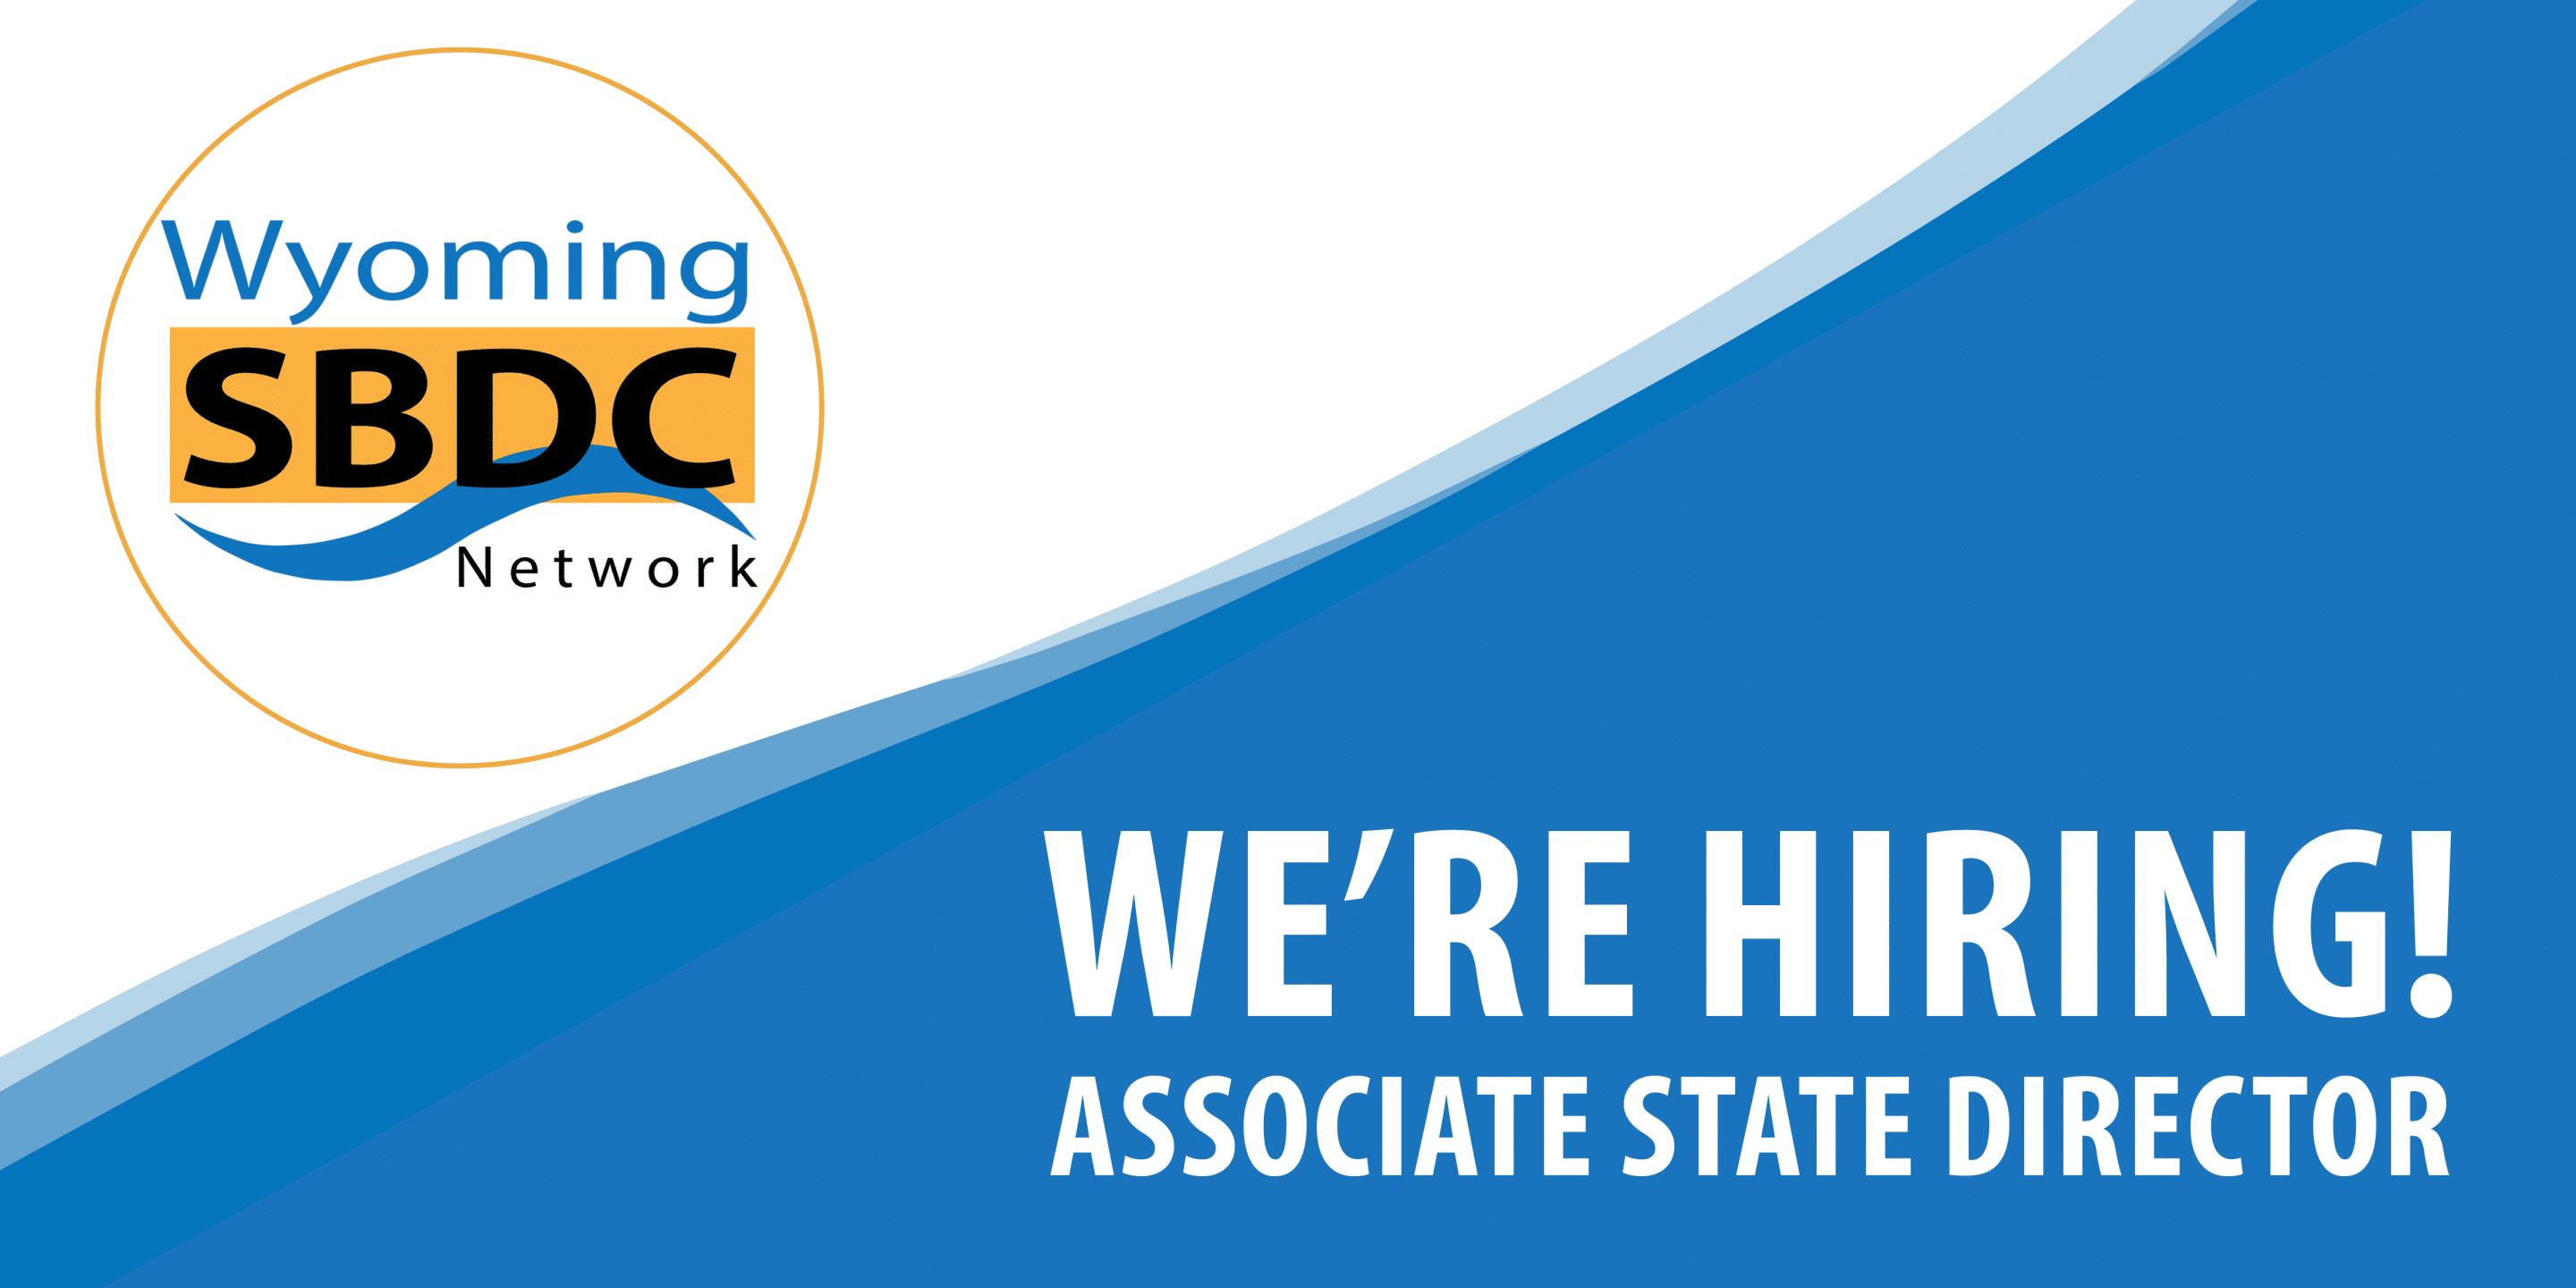 The Wyoming SBDC Network Is Hiring an Associate State Director